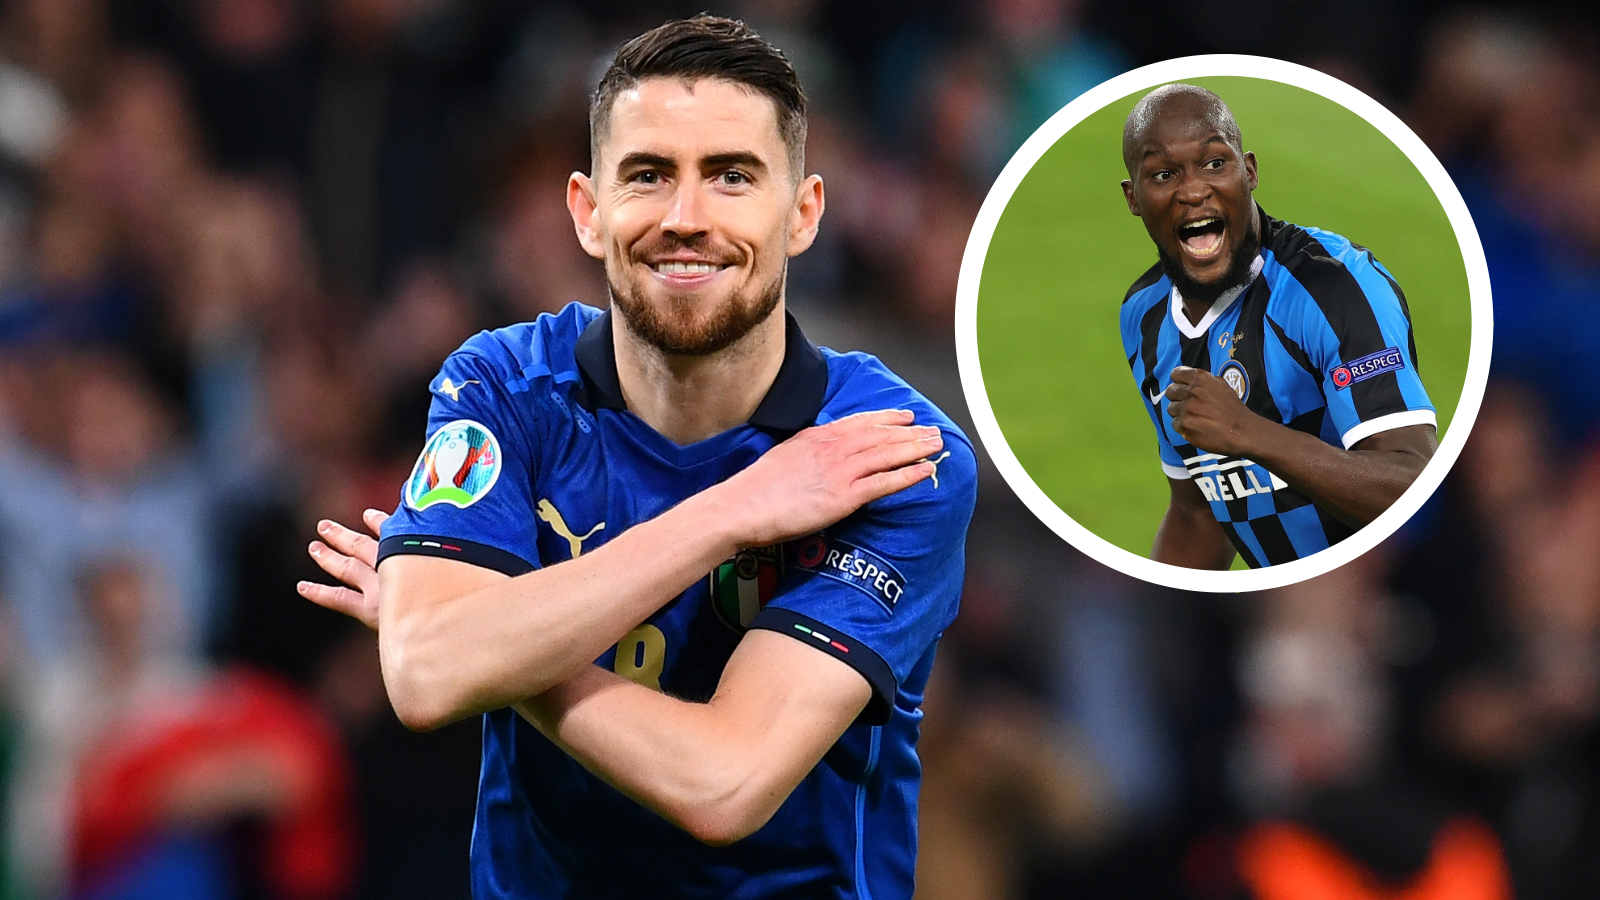 Jorginho reacts to talk of Lukaku returning to Chelsea as £98m deal is agreed